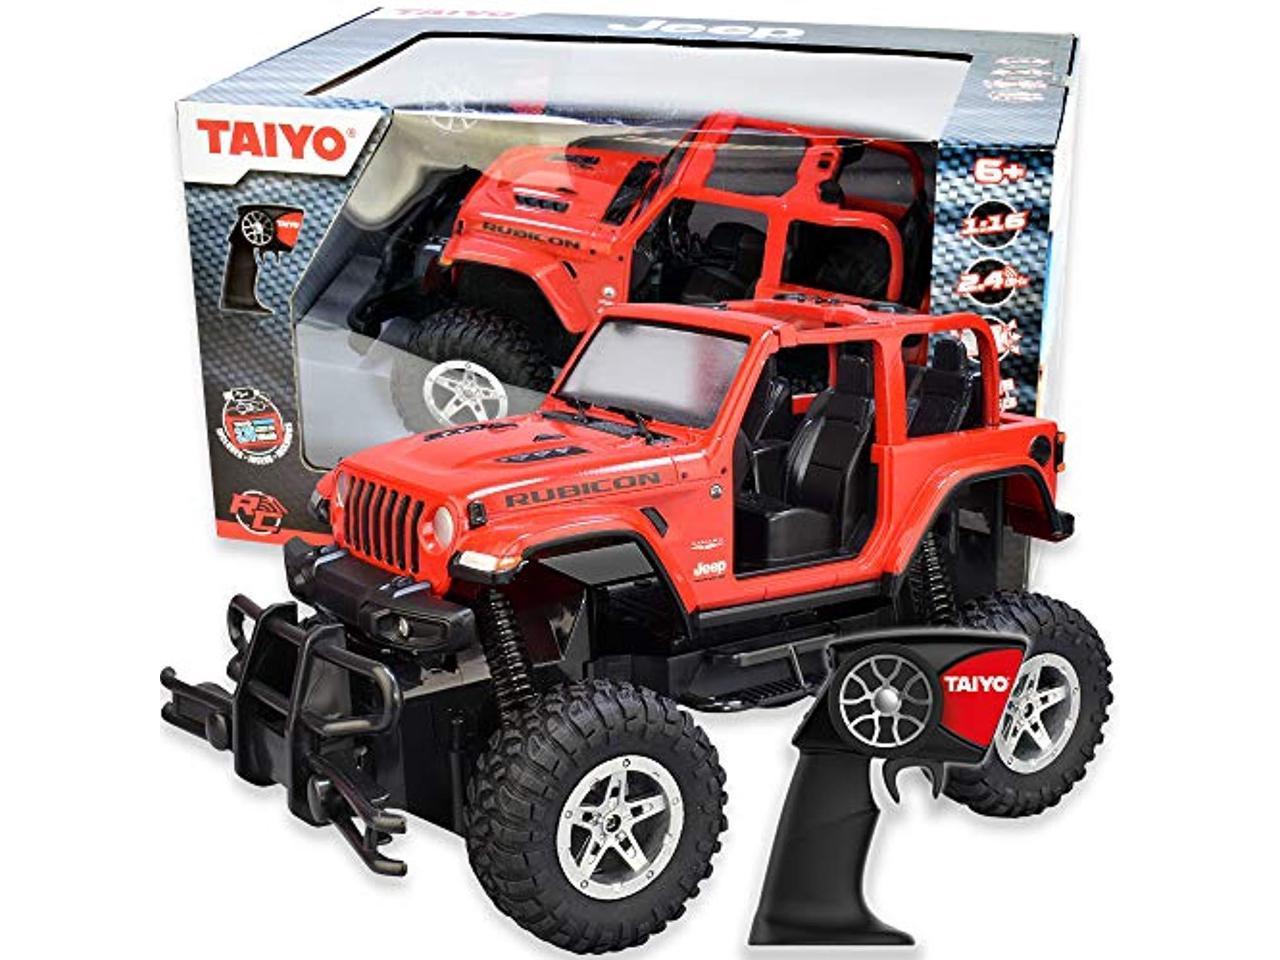 fast battery remote control cars